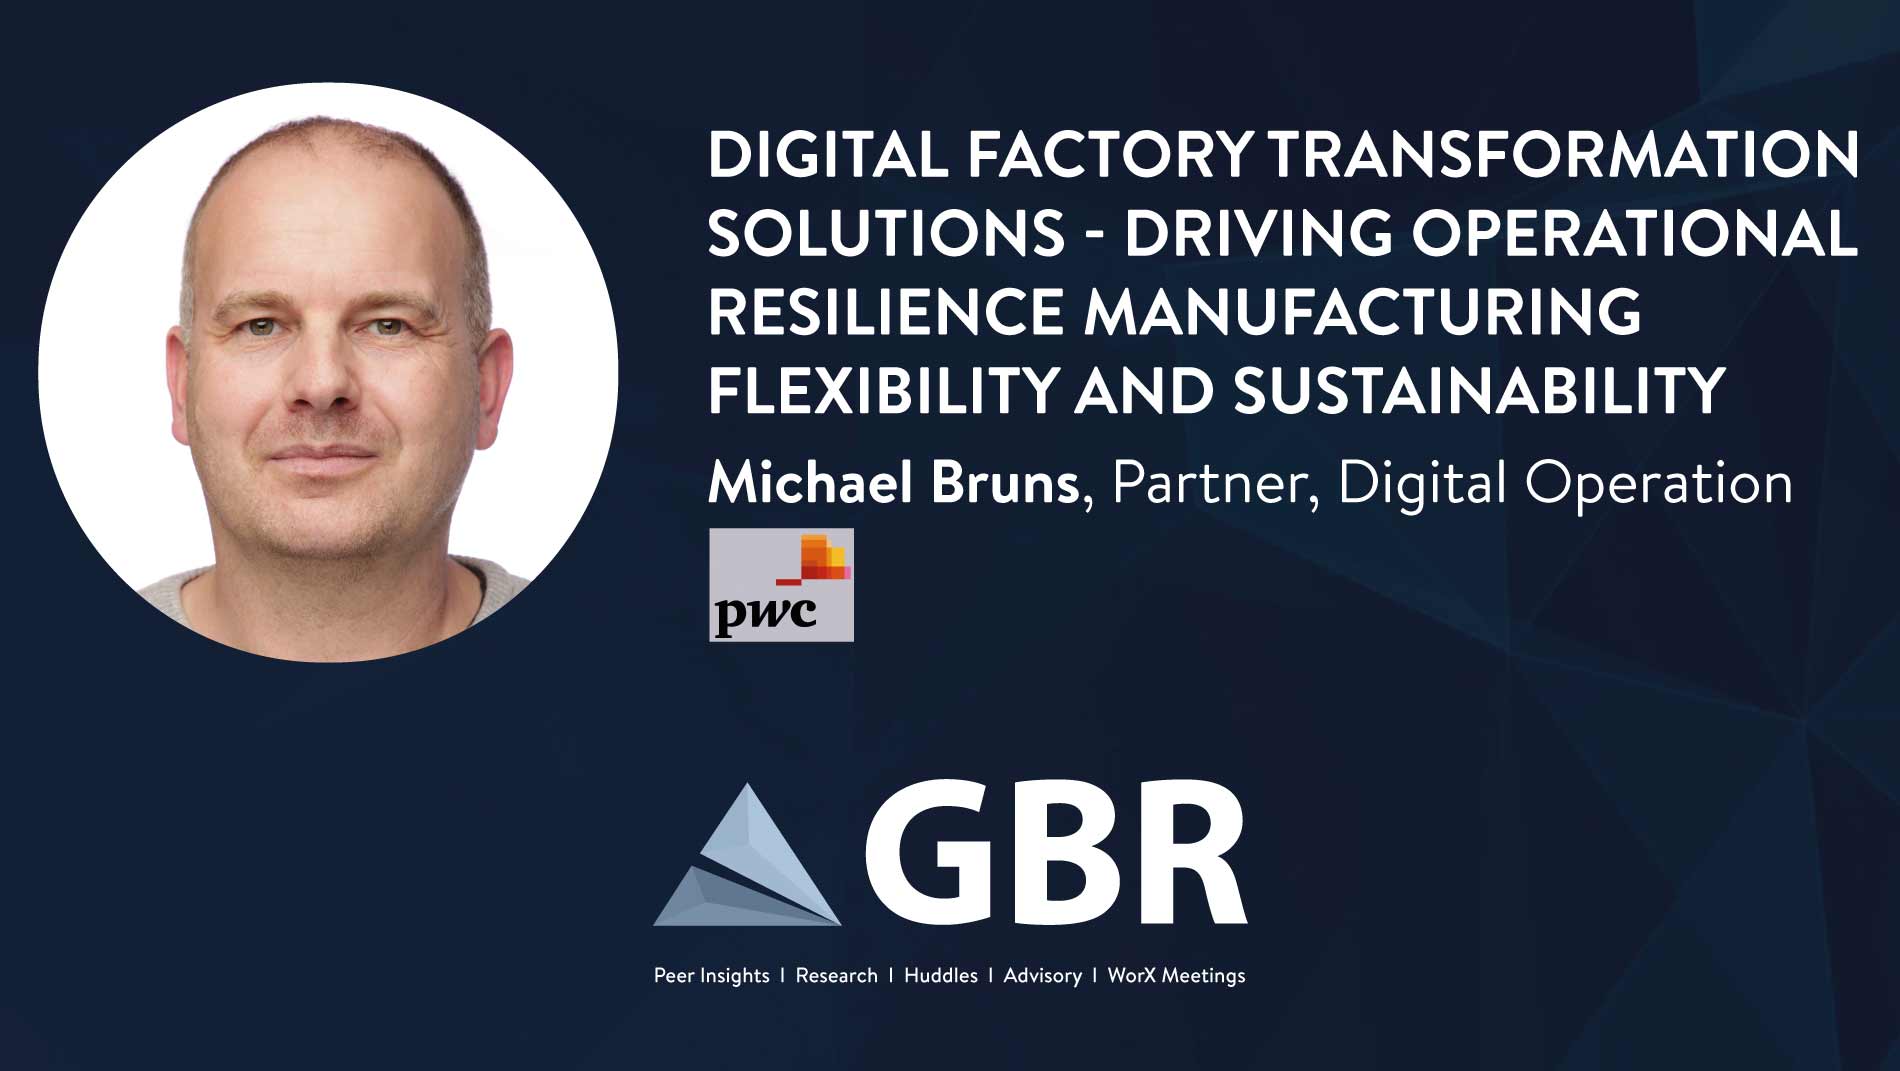 Digital Factory Transformation Solutions – Driving Operational Resilience Manufacturing Flexibility and Sustainability